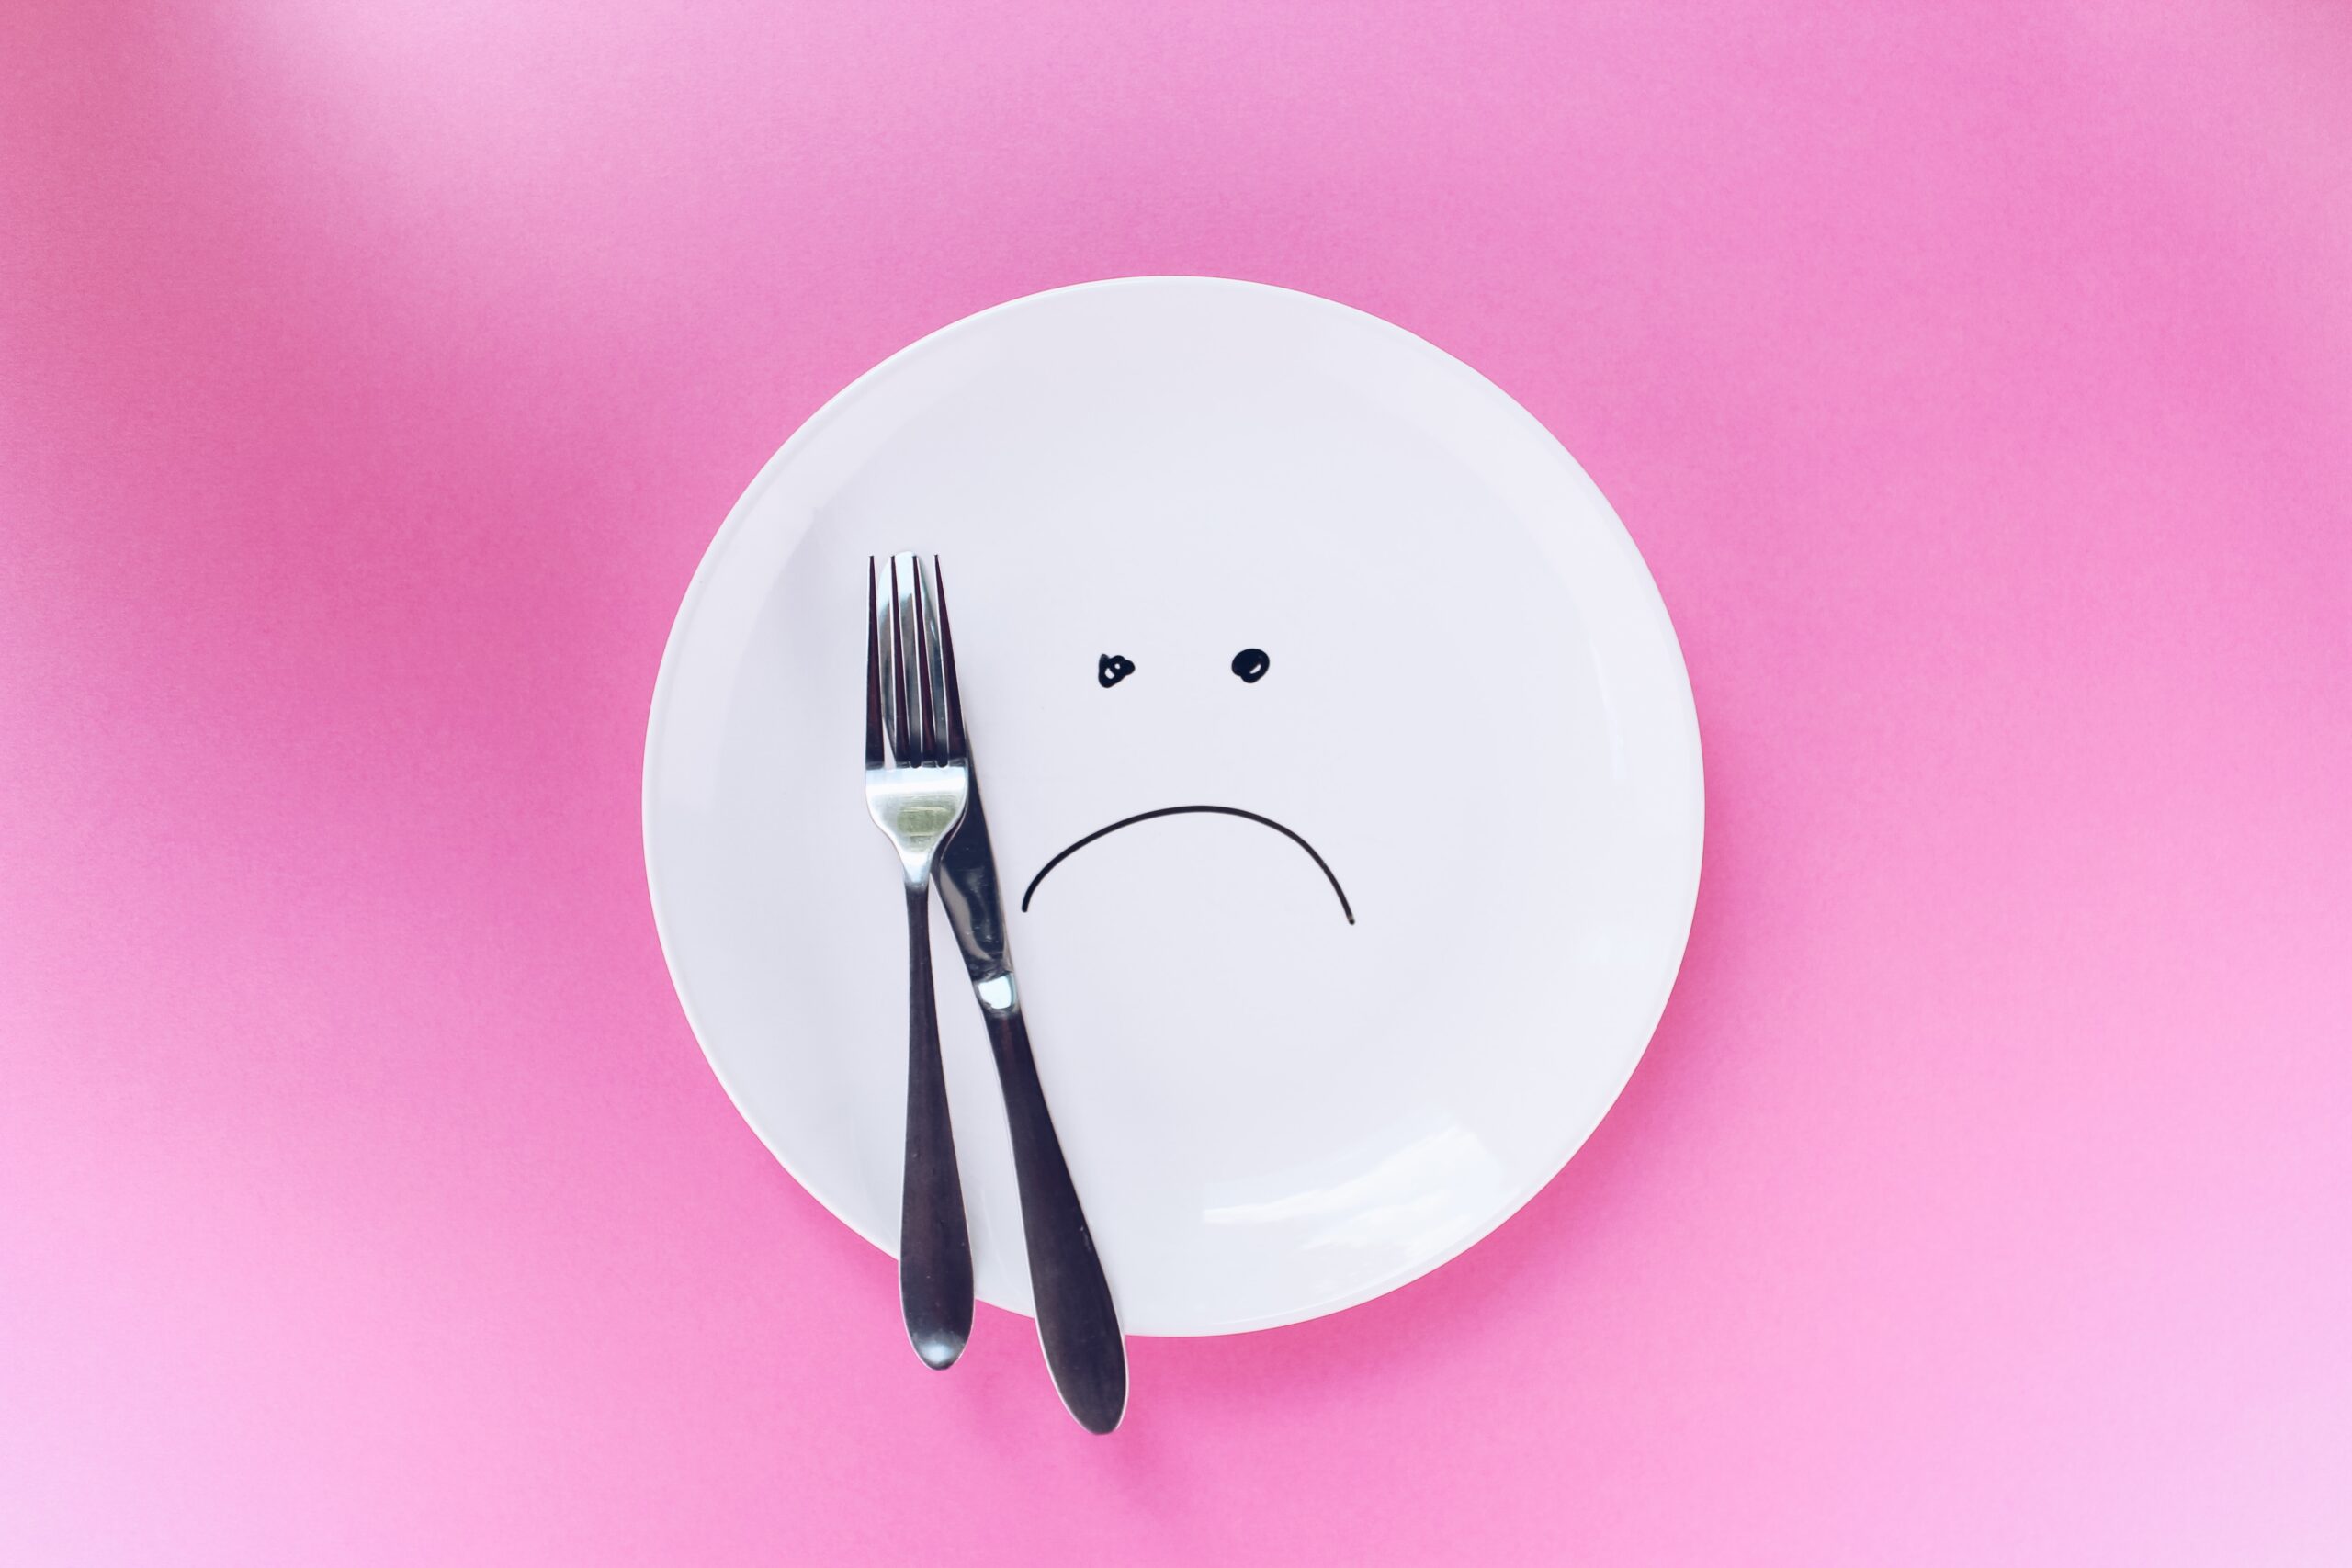 A white dinner plate with a sad face drawn on it, with a silver knife and fork on a pink background